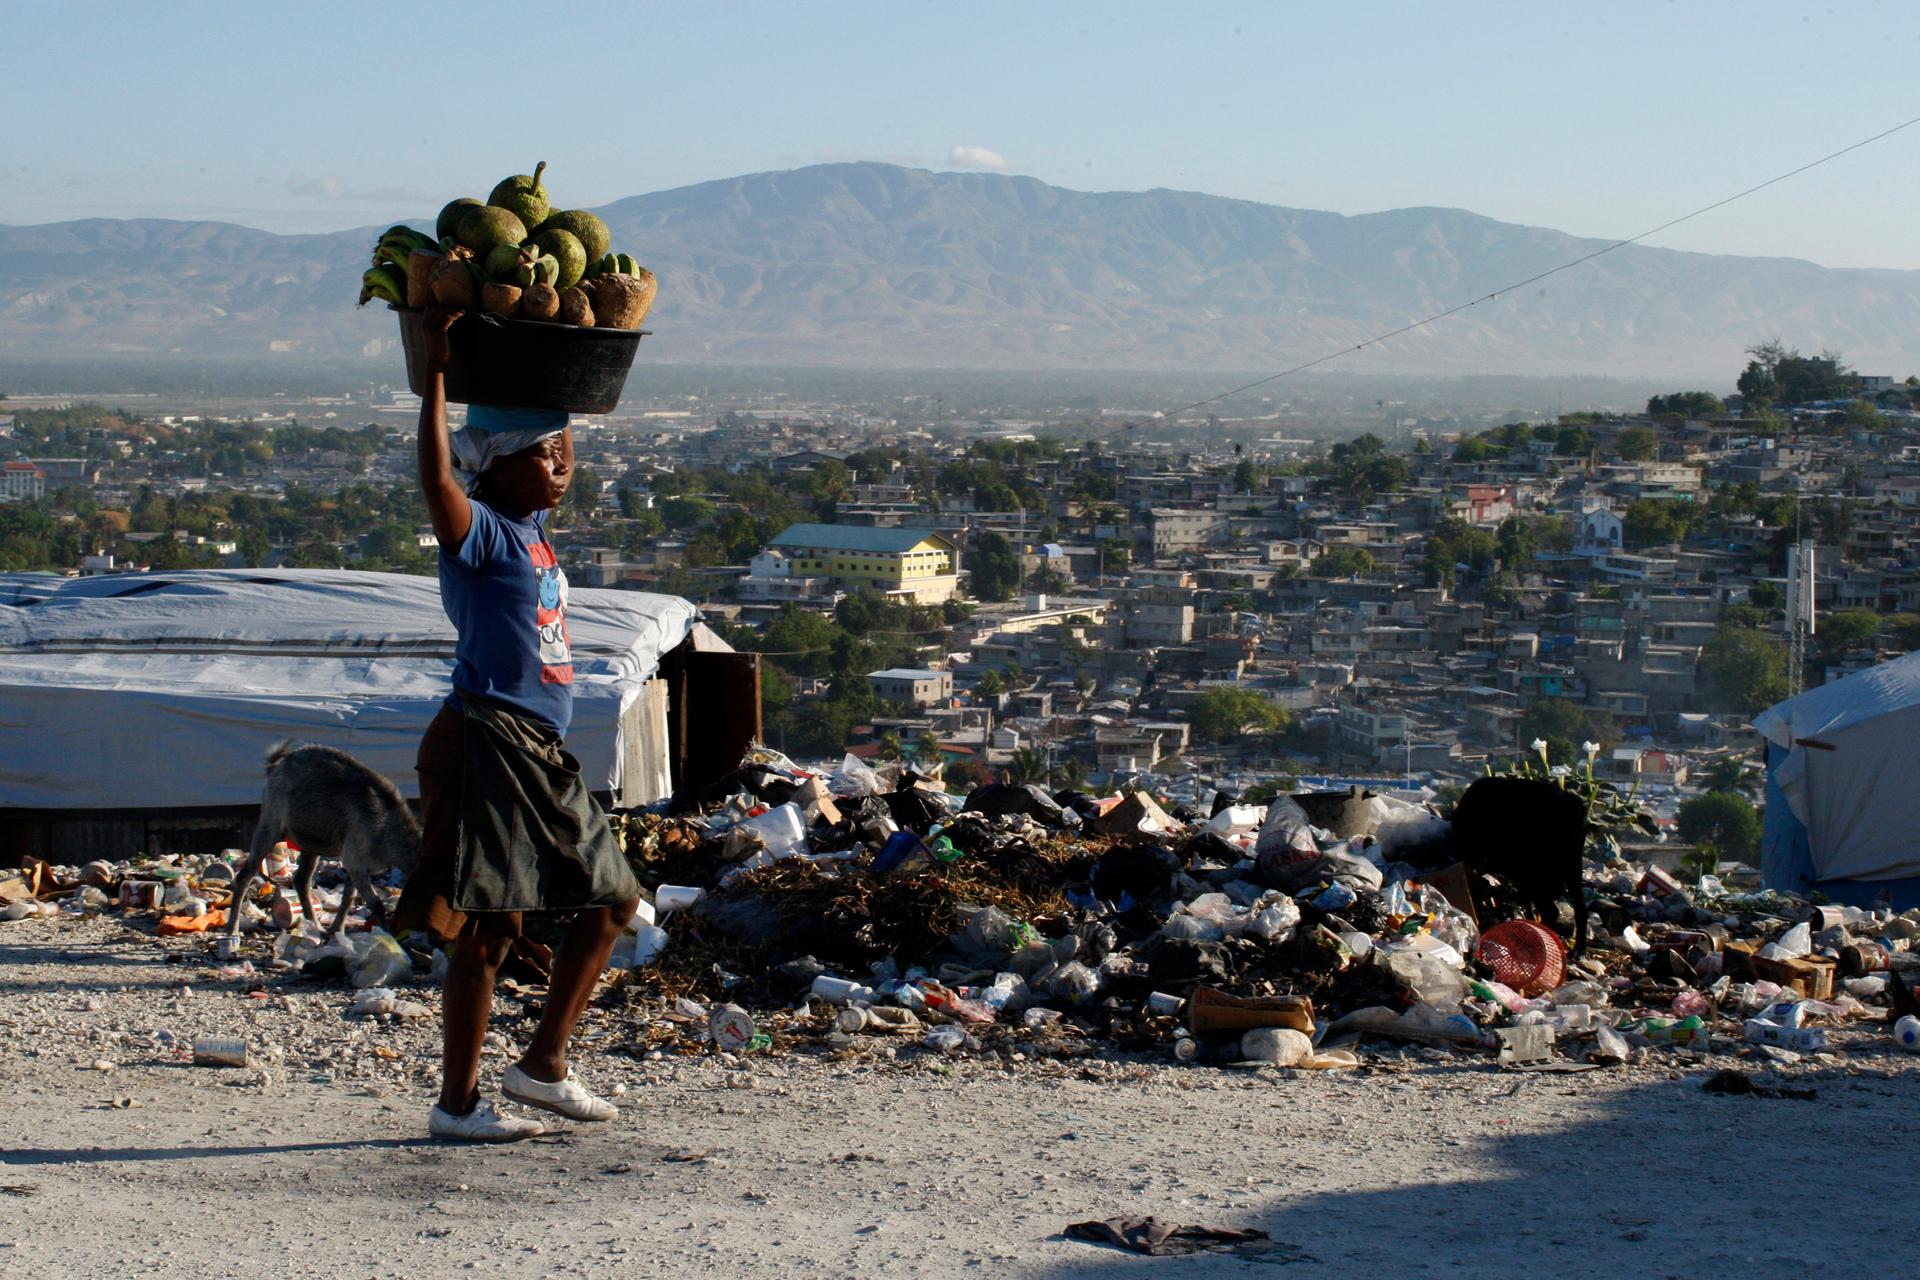 A Haitian woman carries produce to be sold in Port-au-Prince on March 15, 2011. An estimated three million people were affected by the earthquake in 2010.